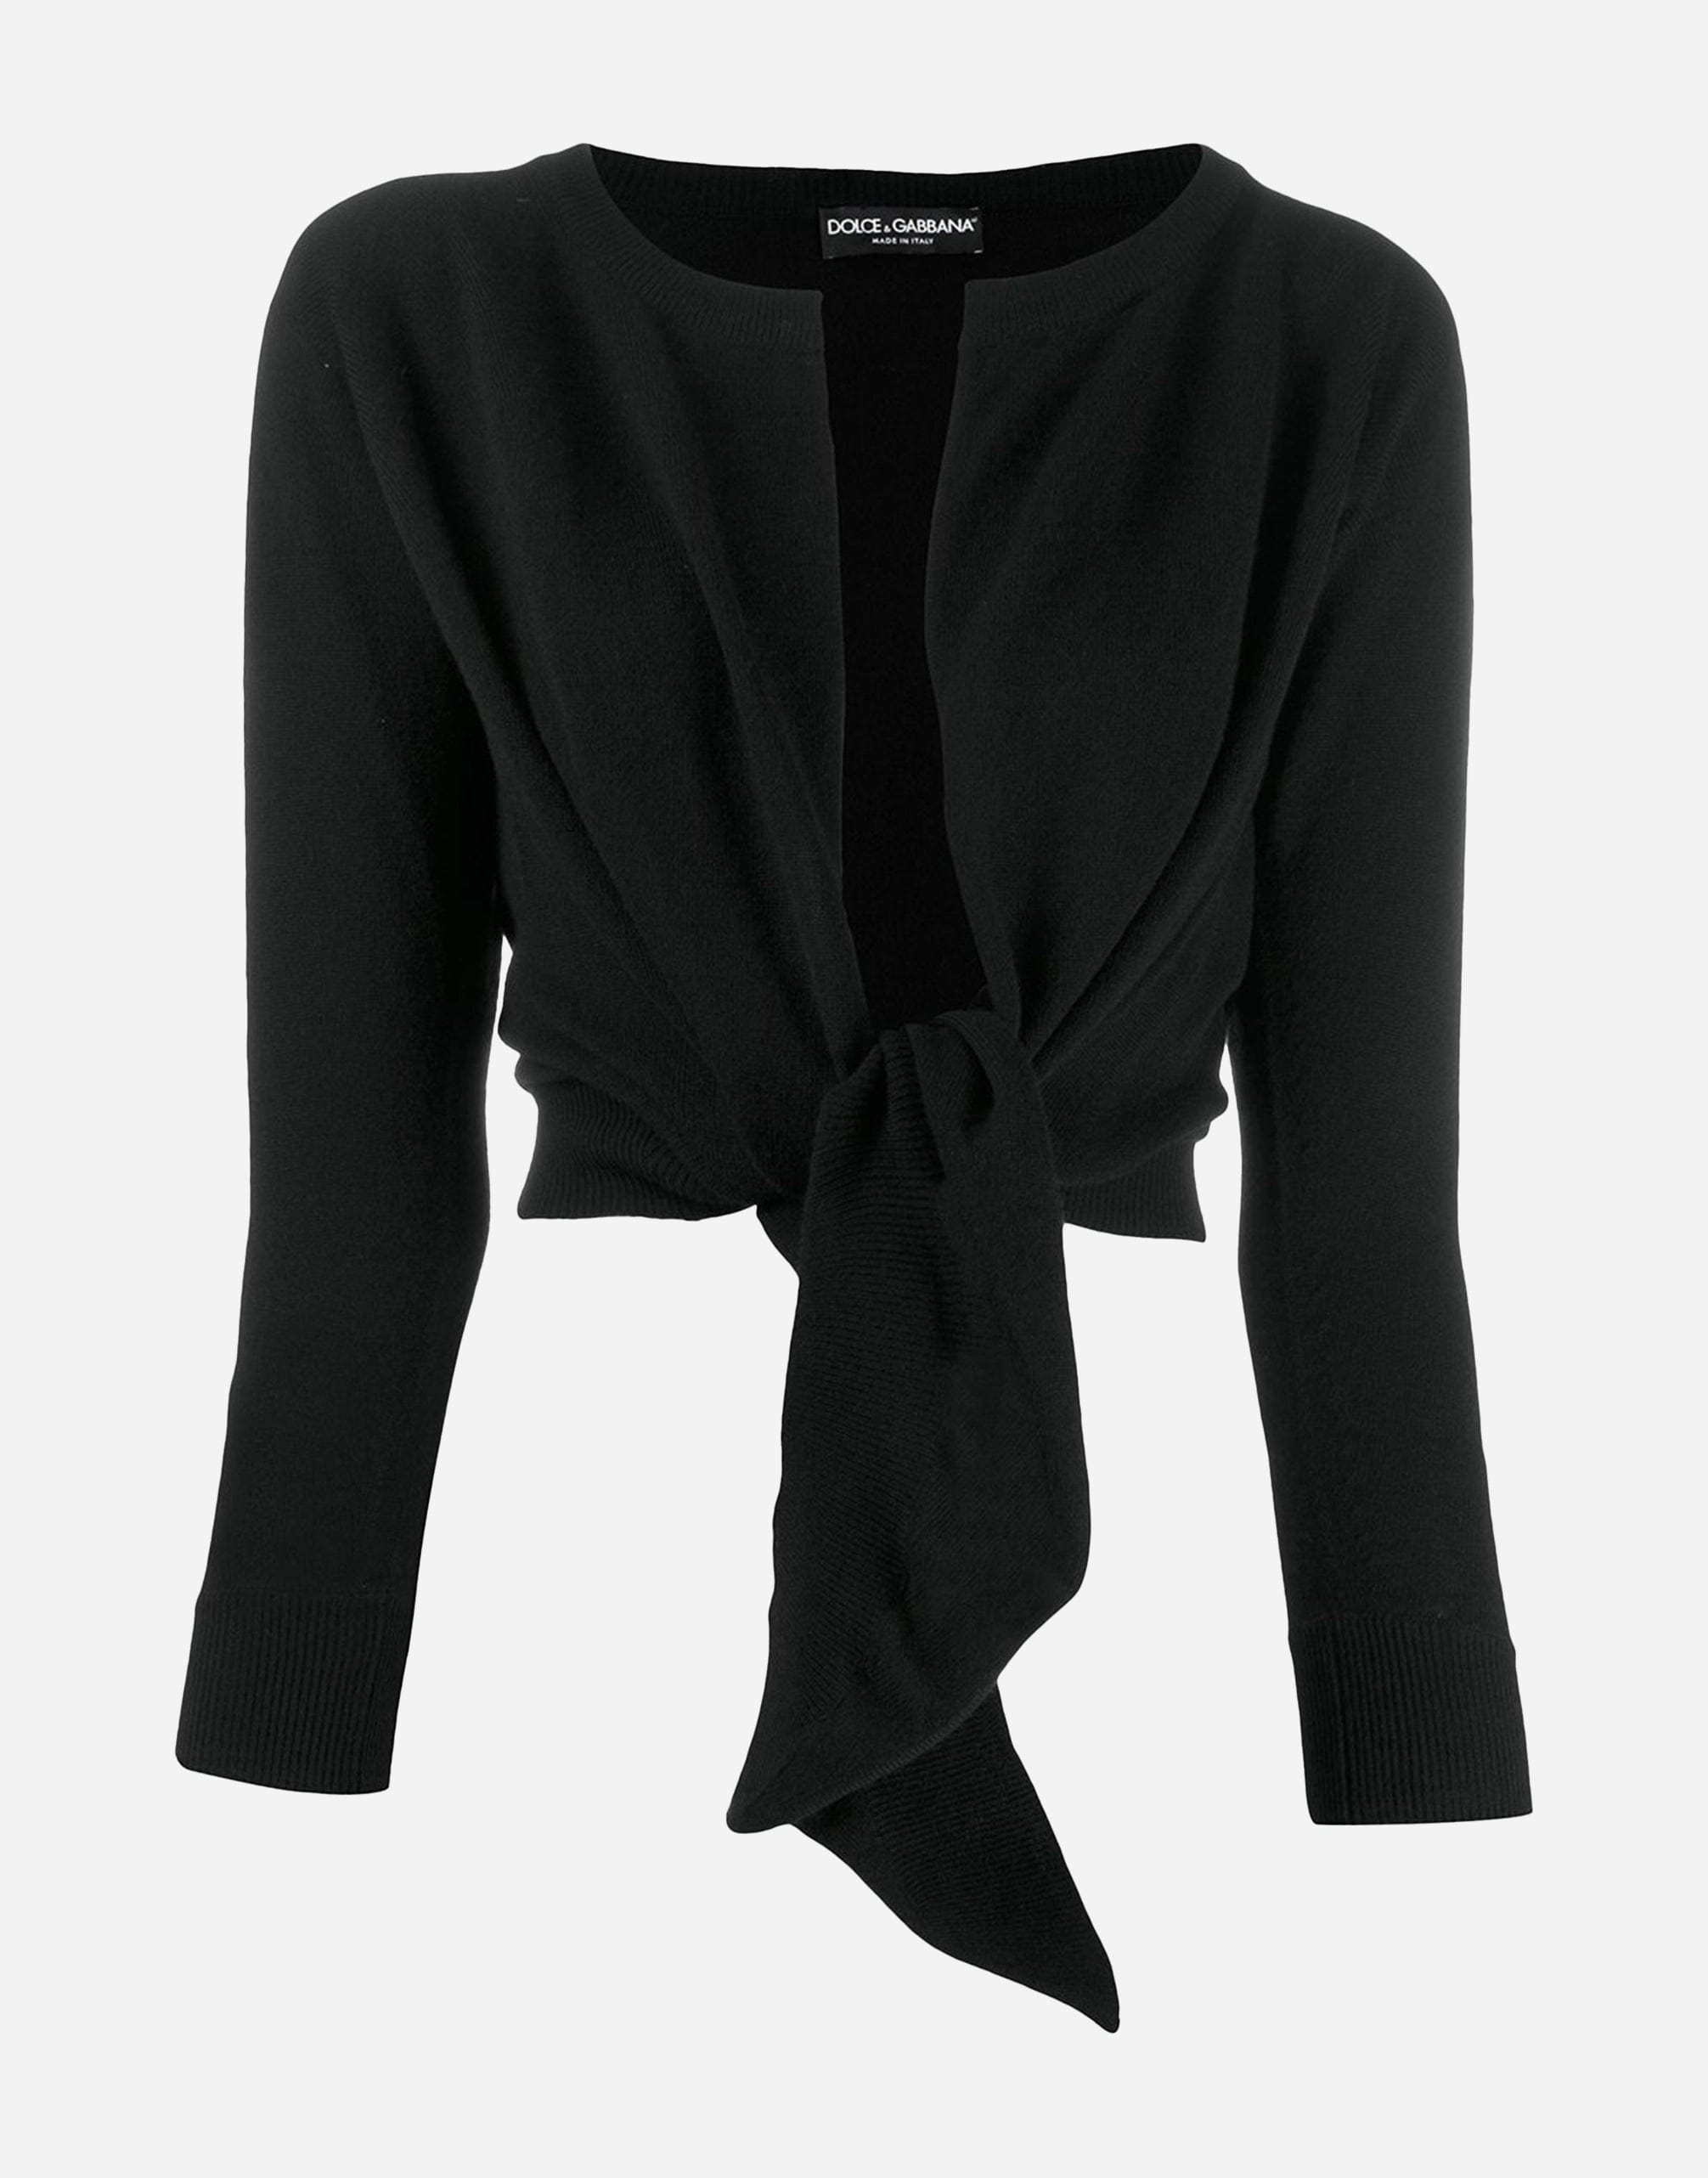 Dolce & Gabbana Tied Front Cardigan